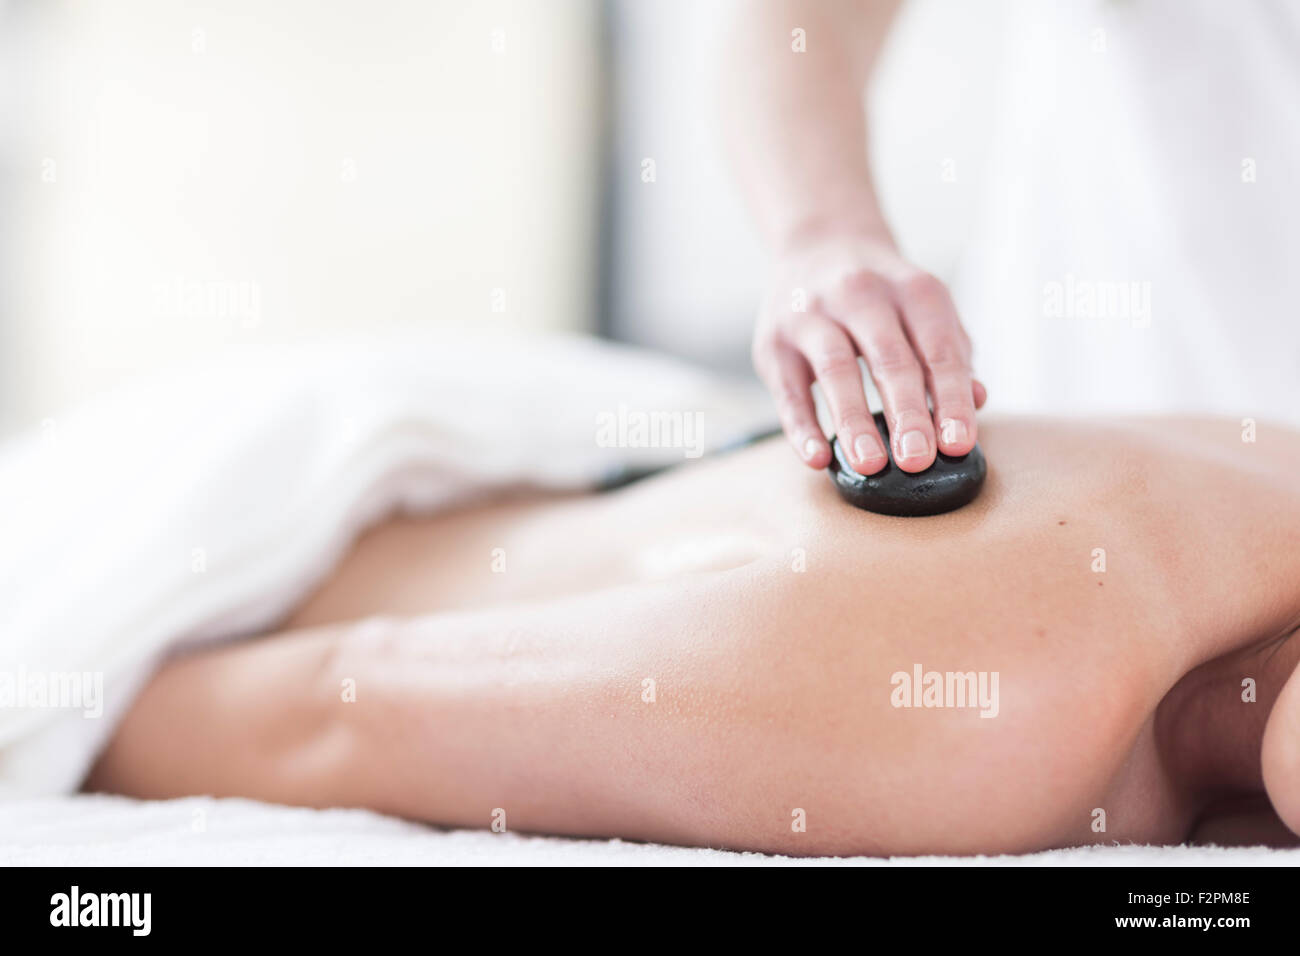 Woman receiving hot stone massage in a spa Stock Photo